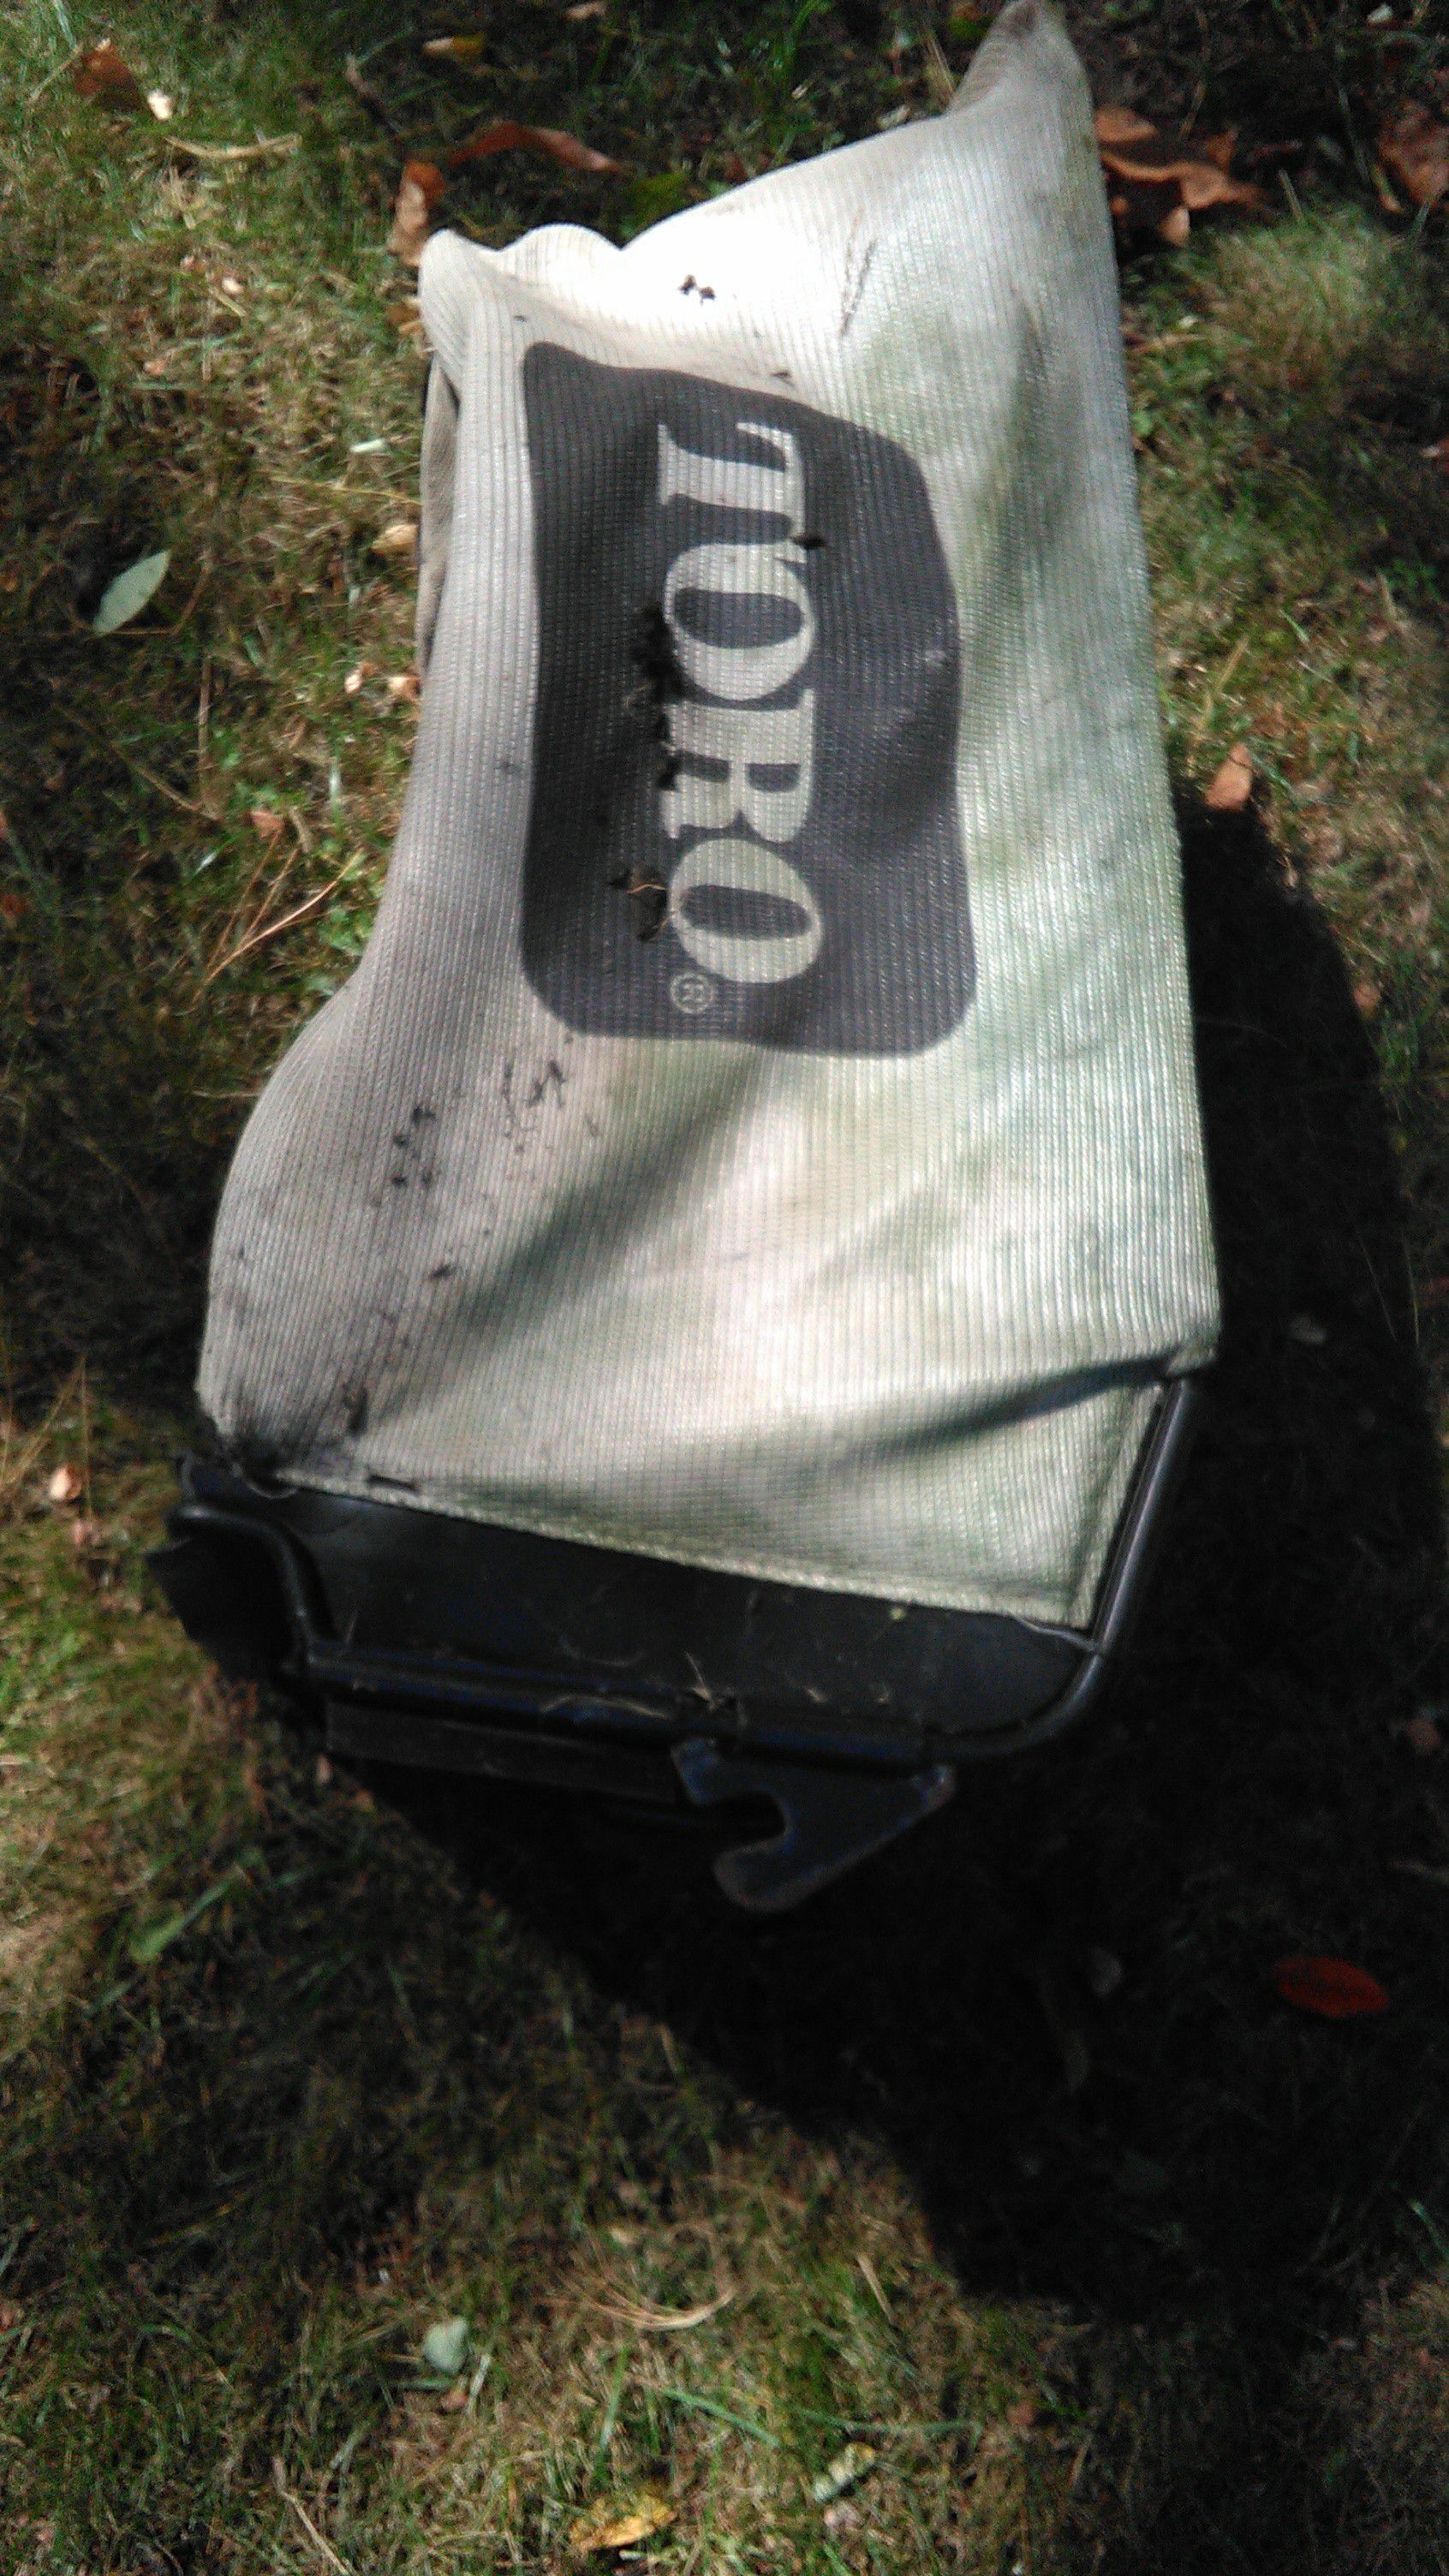 White Toro replacement lawn mower bag and frame grass catcher part 21"